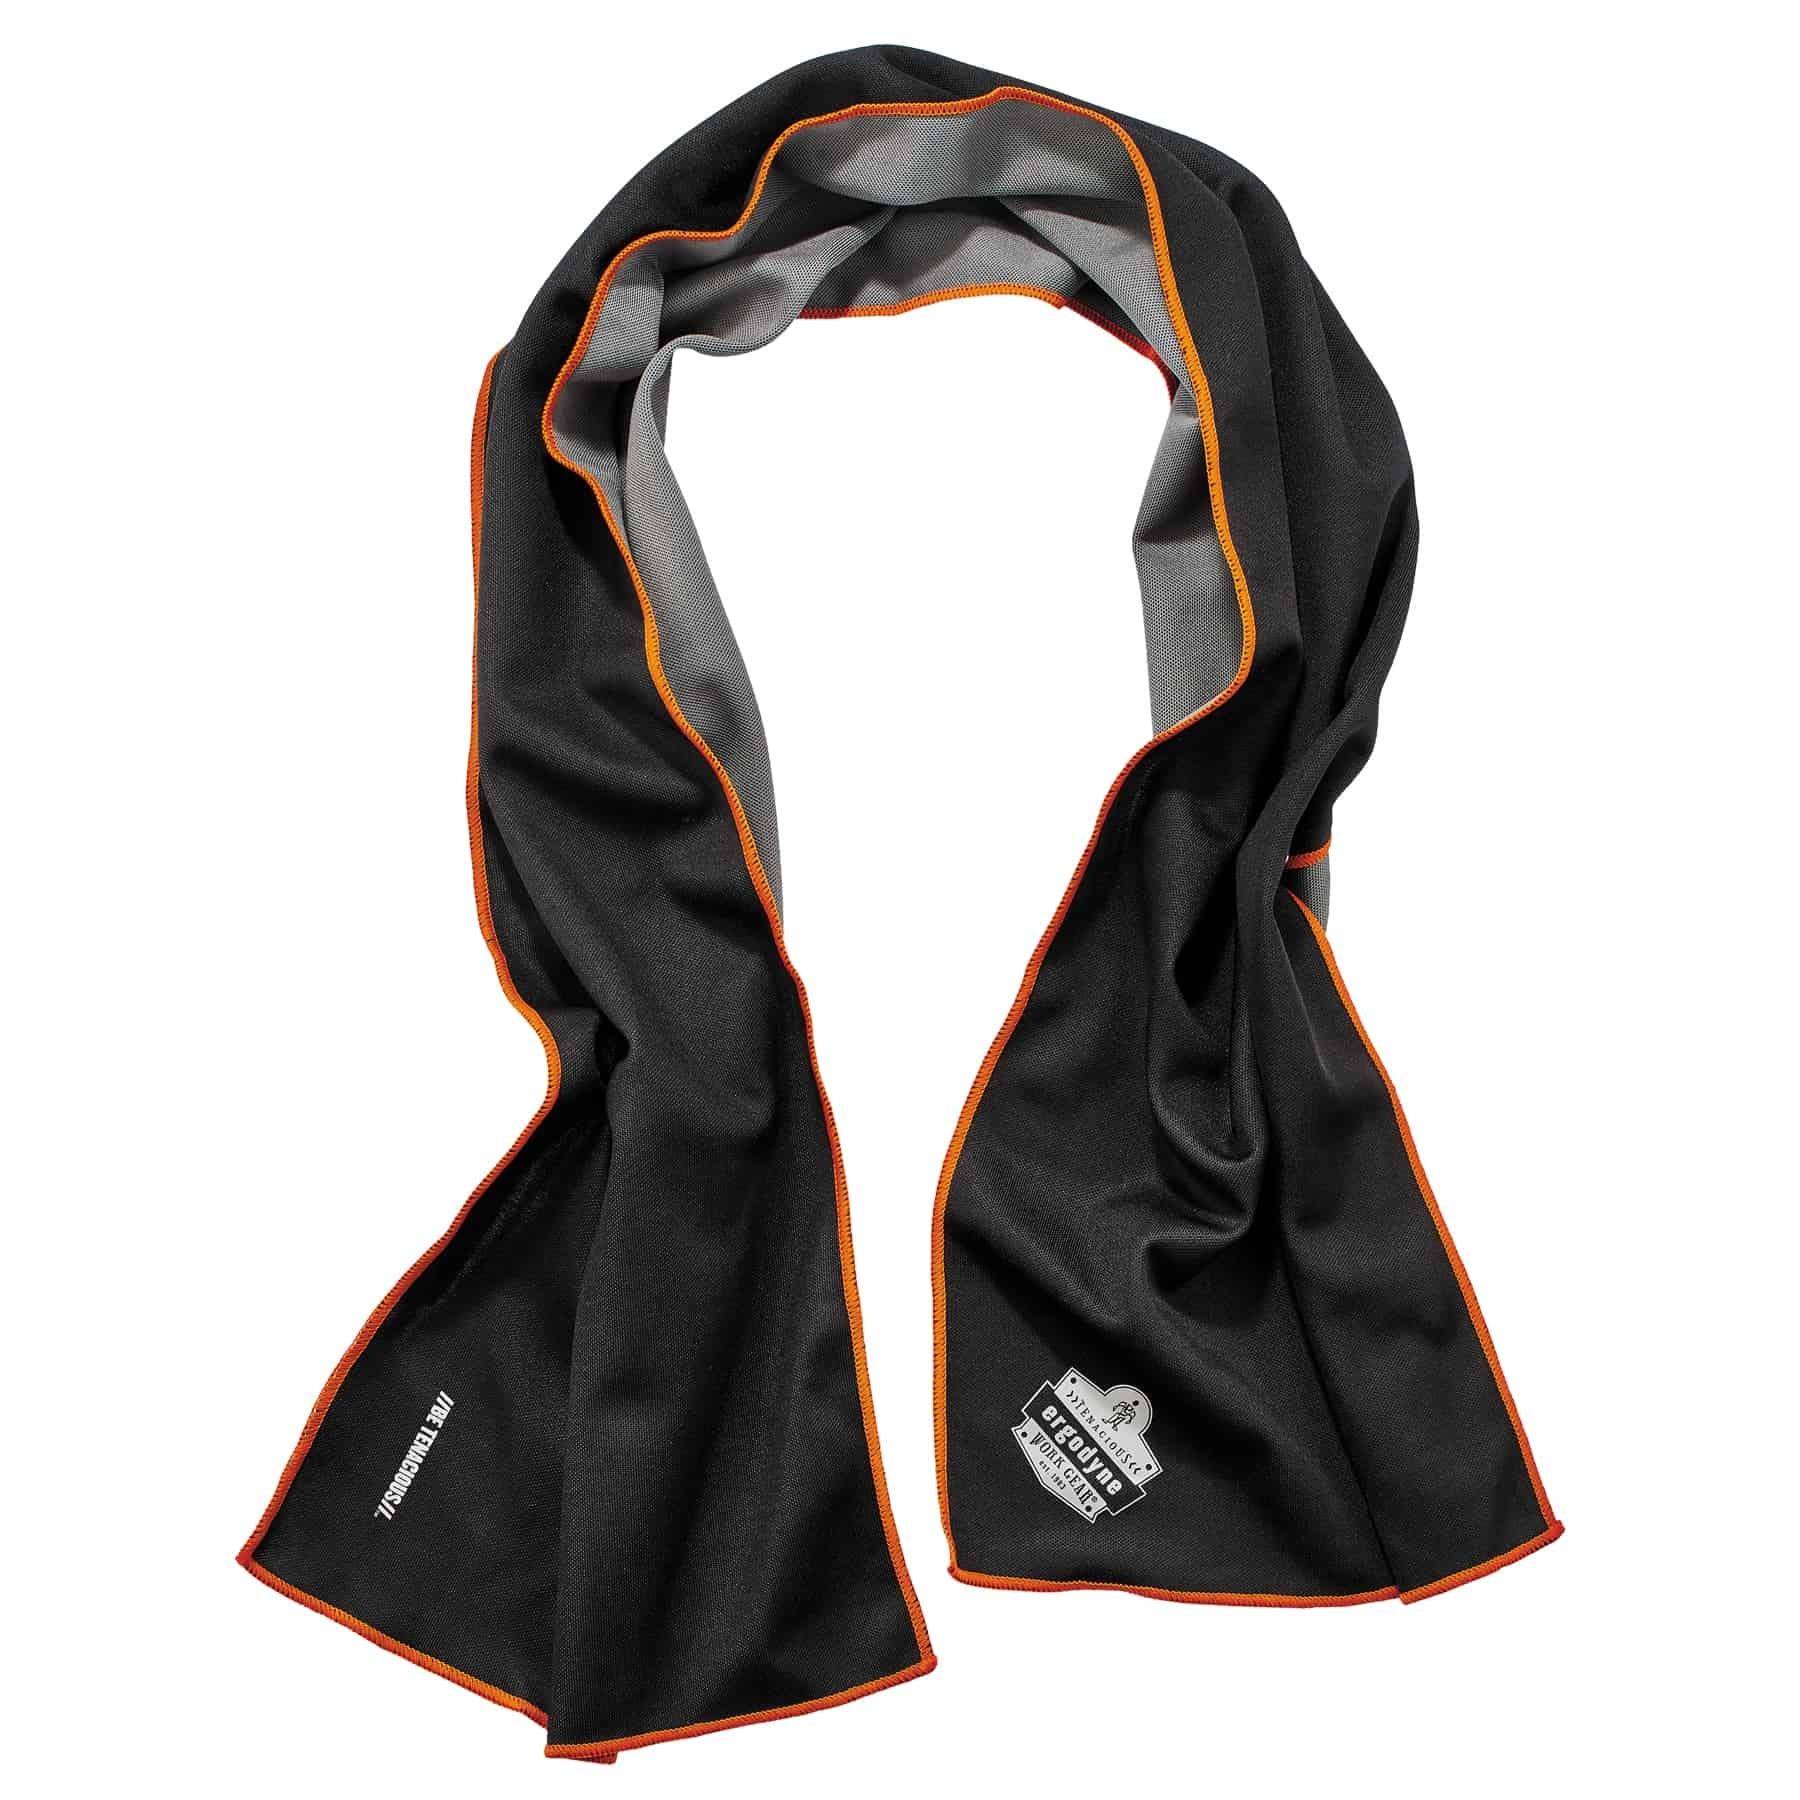 CHILL-ITS CHILLX COOLING TOWEL BLACK - Cooling Apparel and Accessories